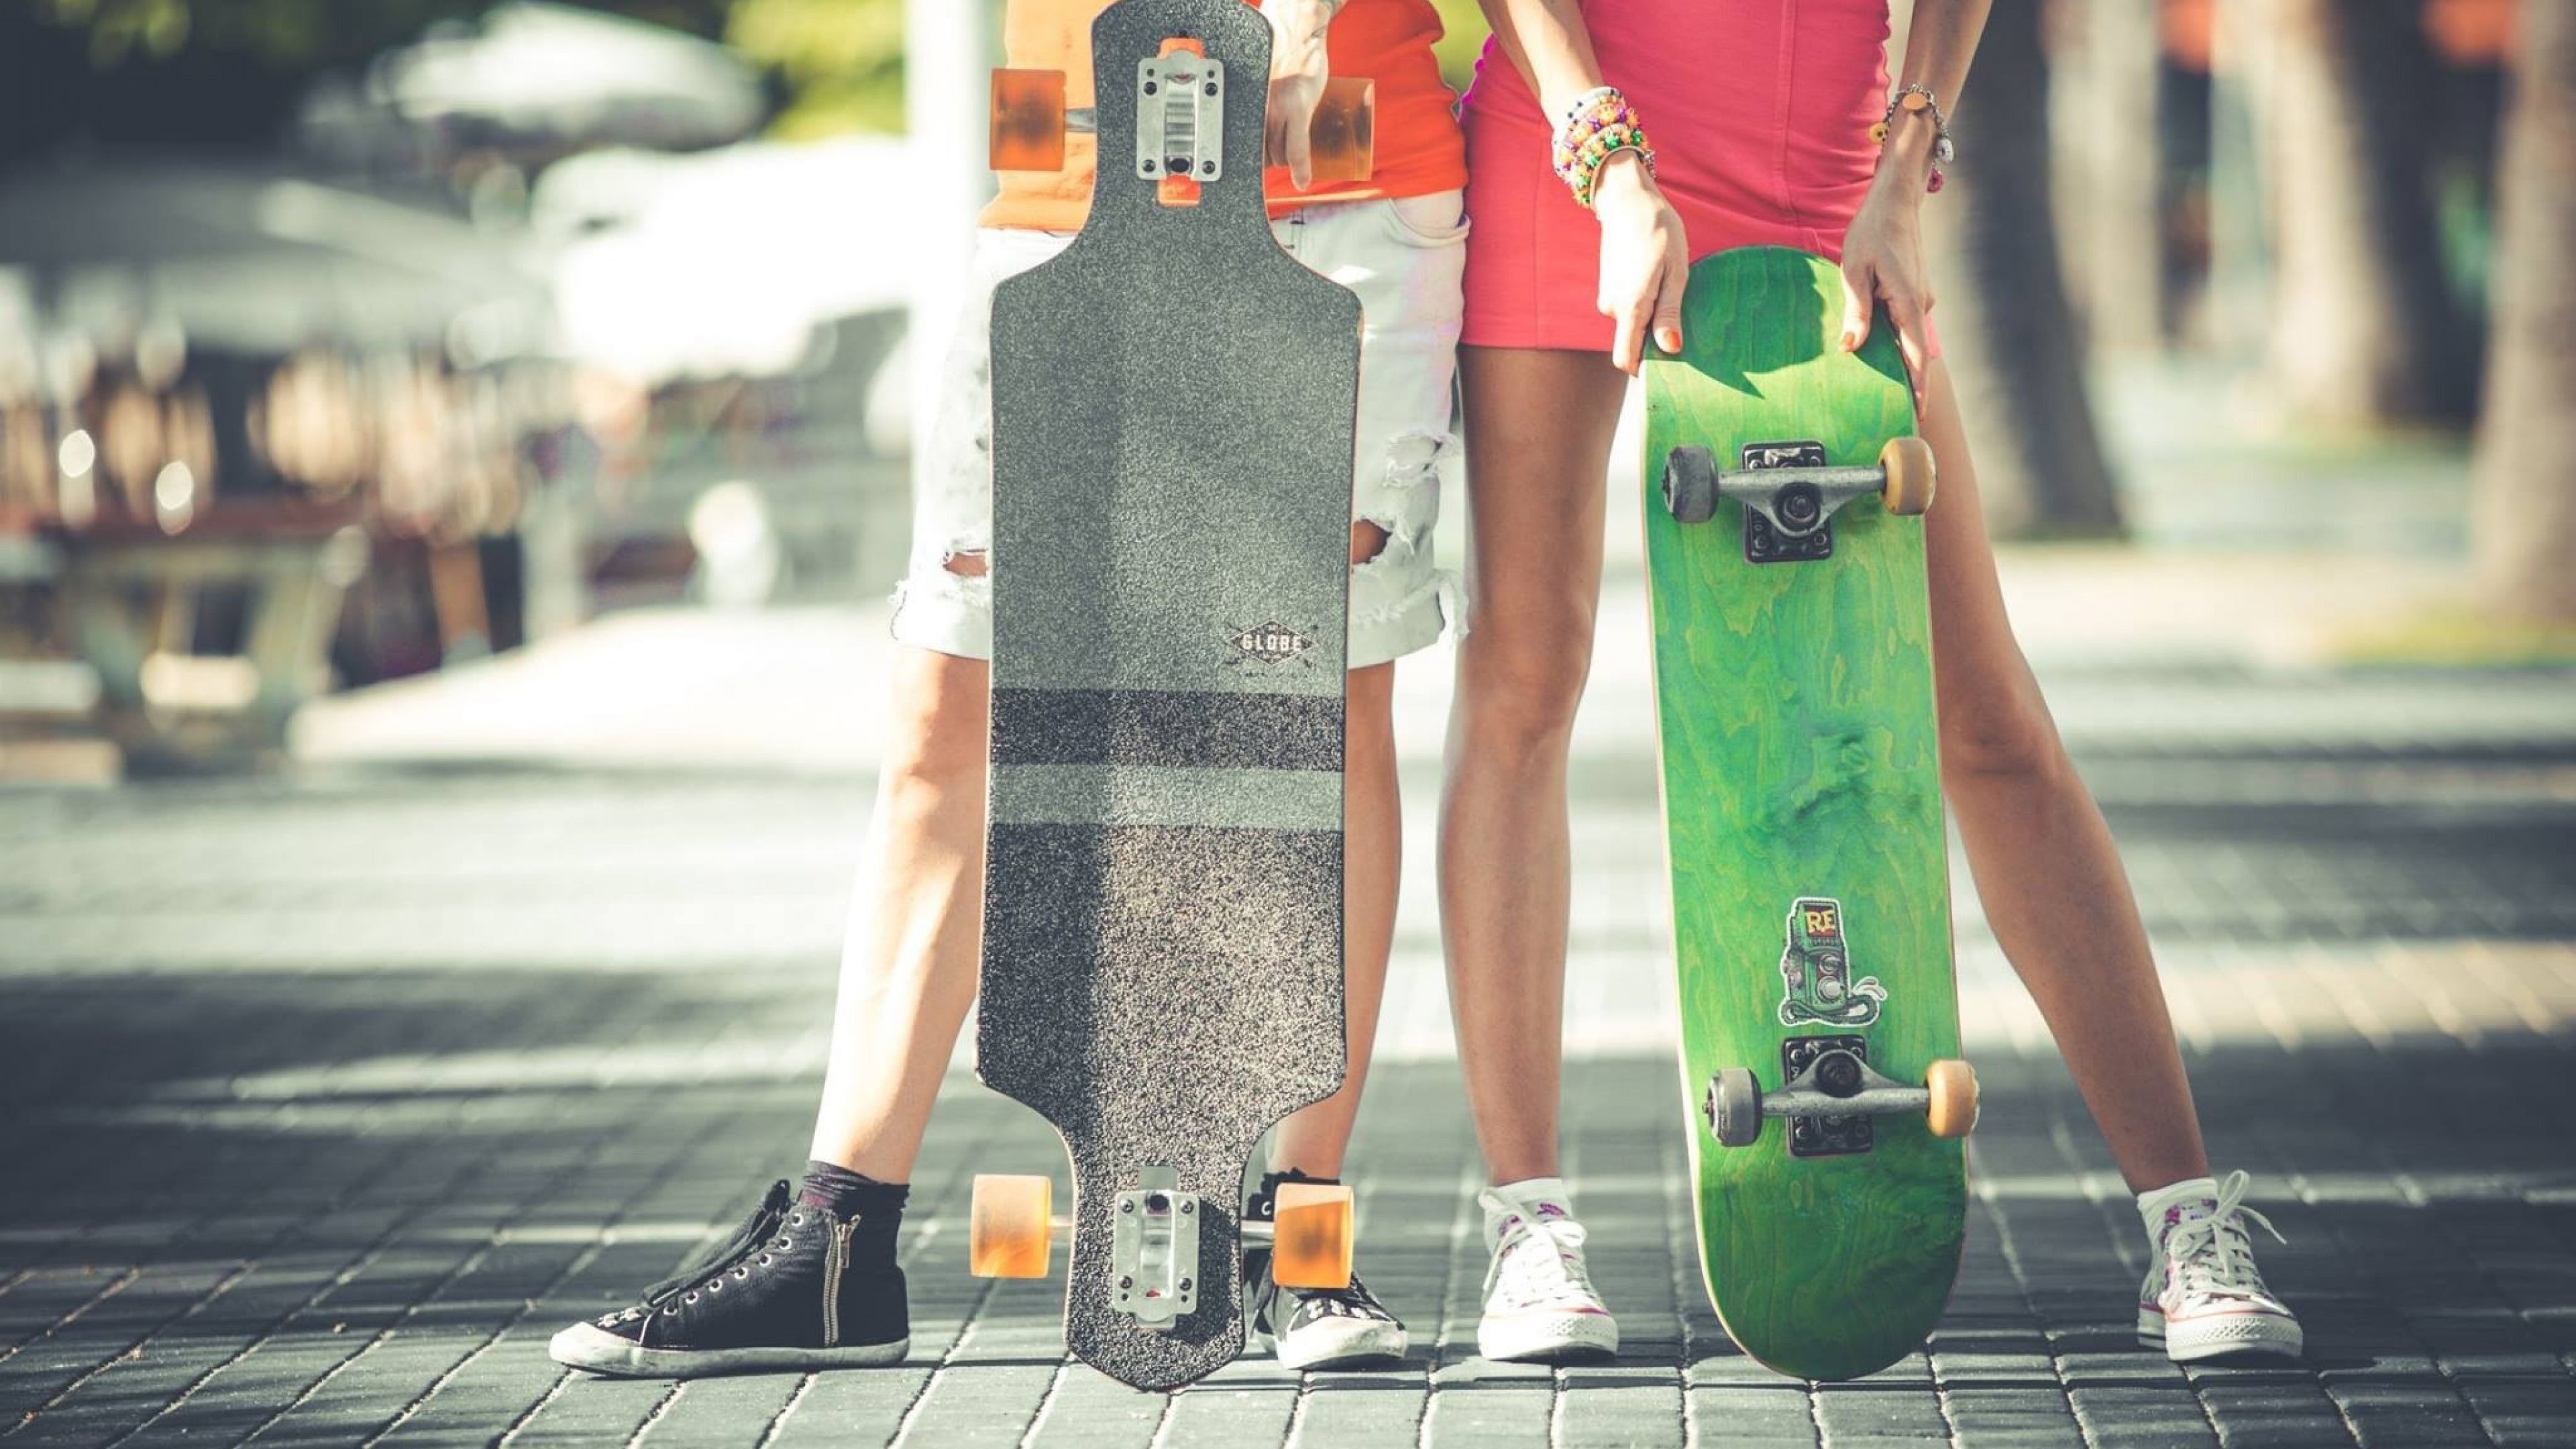 Longboarding: Riding on a longboard, Freestyle discipline, Recreational activity and sport. 3840x2160 4K Wallpaper.